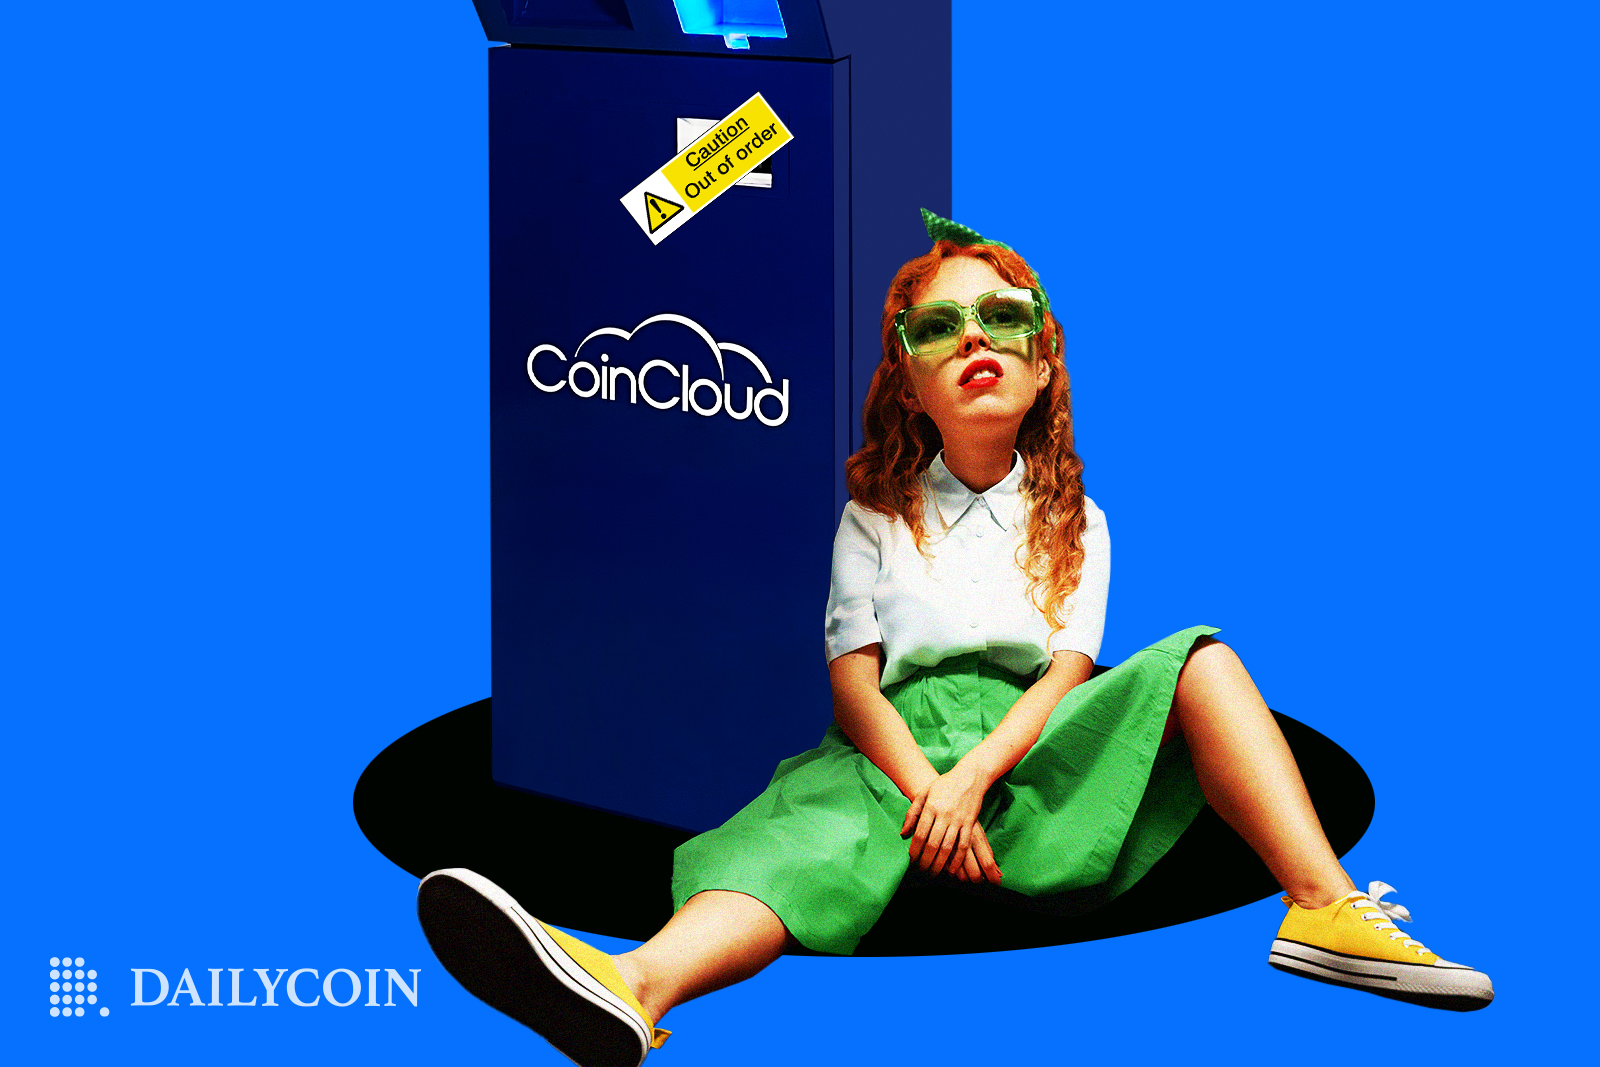 A woman sitting next to an ATM with the logo Coin Cloud, and a caution sticker saying its out of order